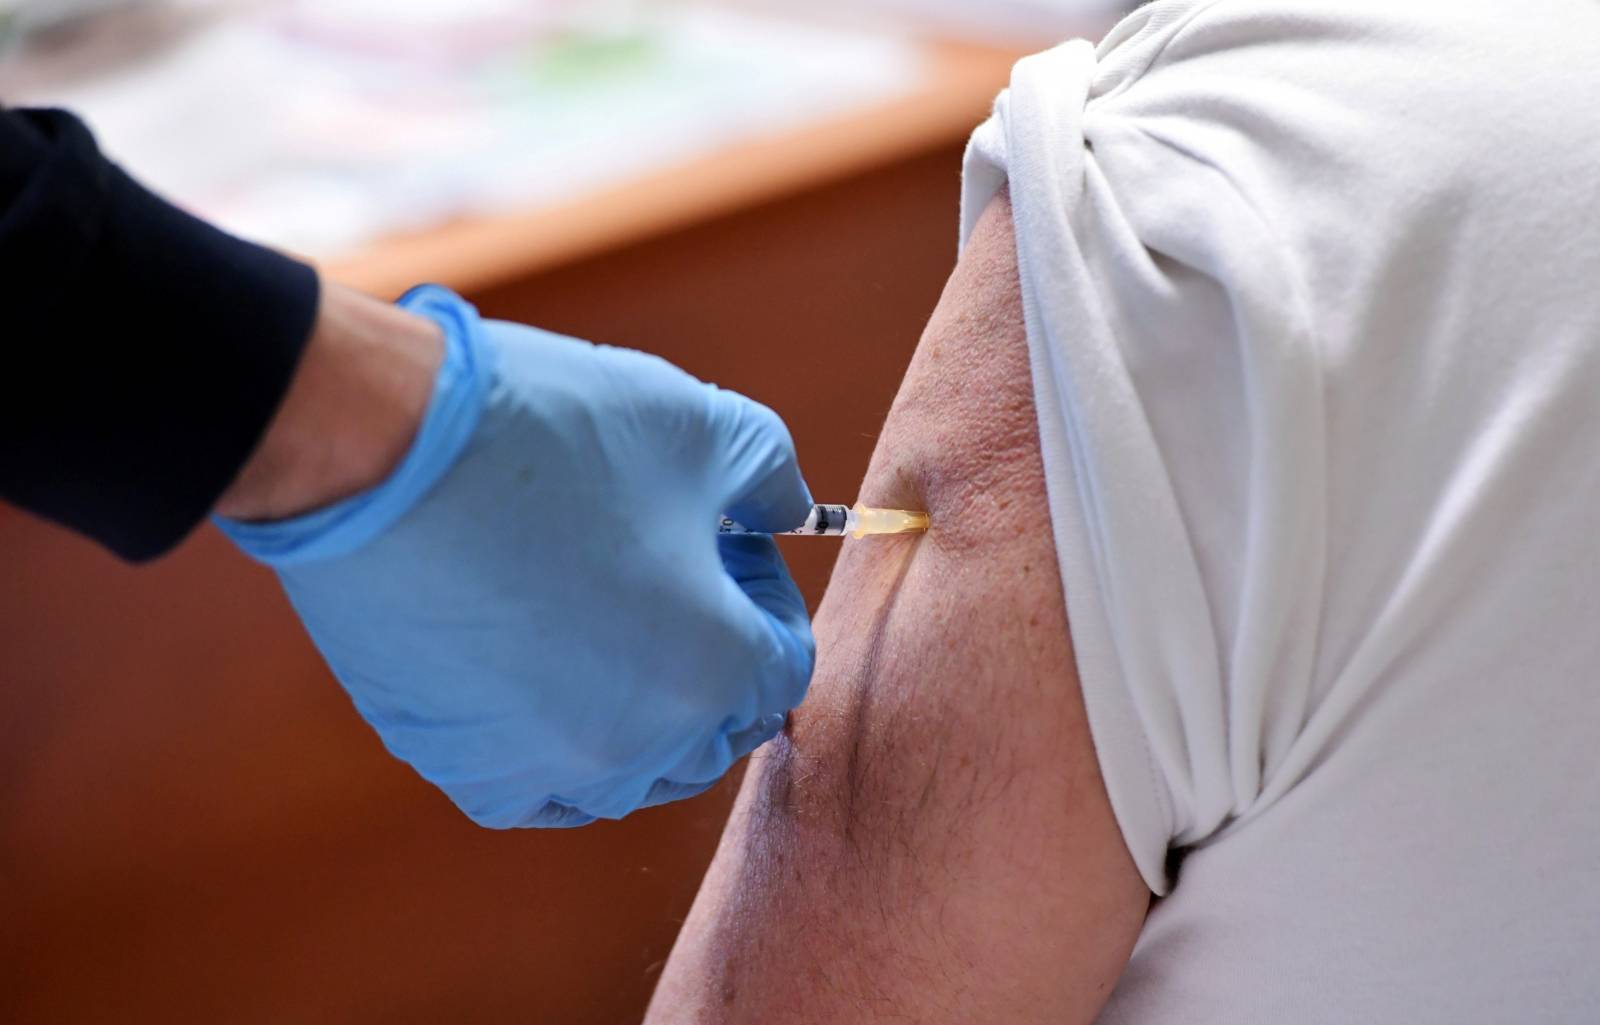 People receive a dose of the Moderna coronavirus disease (COVID-19) vaccine at the Misericordia hospital in Grosseto